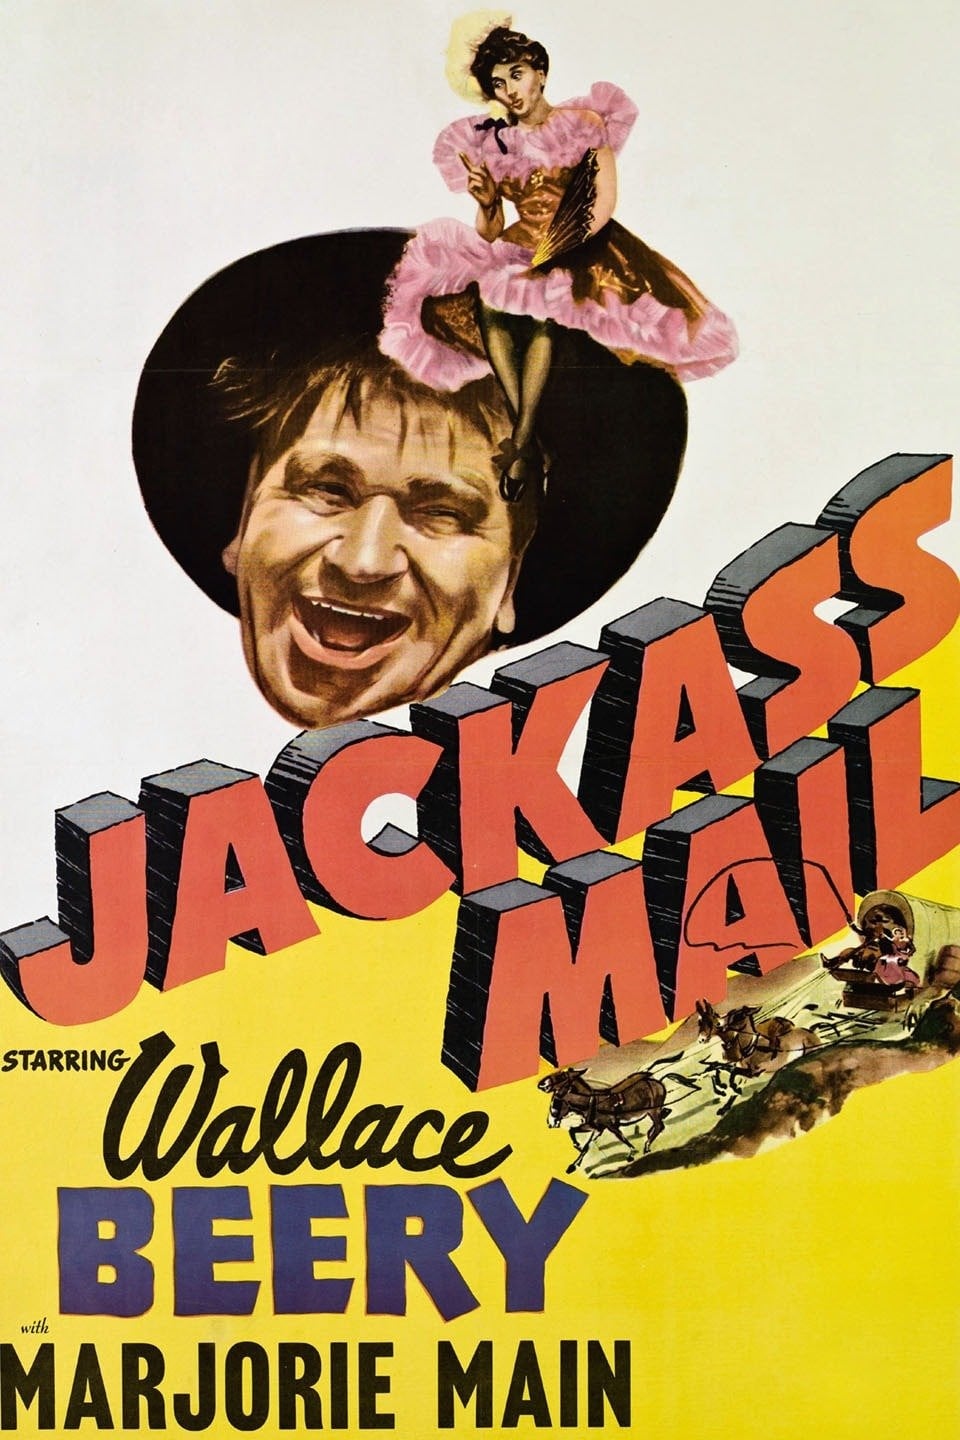 Jackass Mail streaming